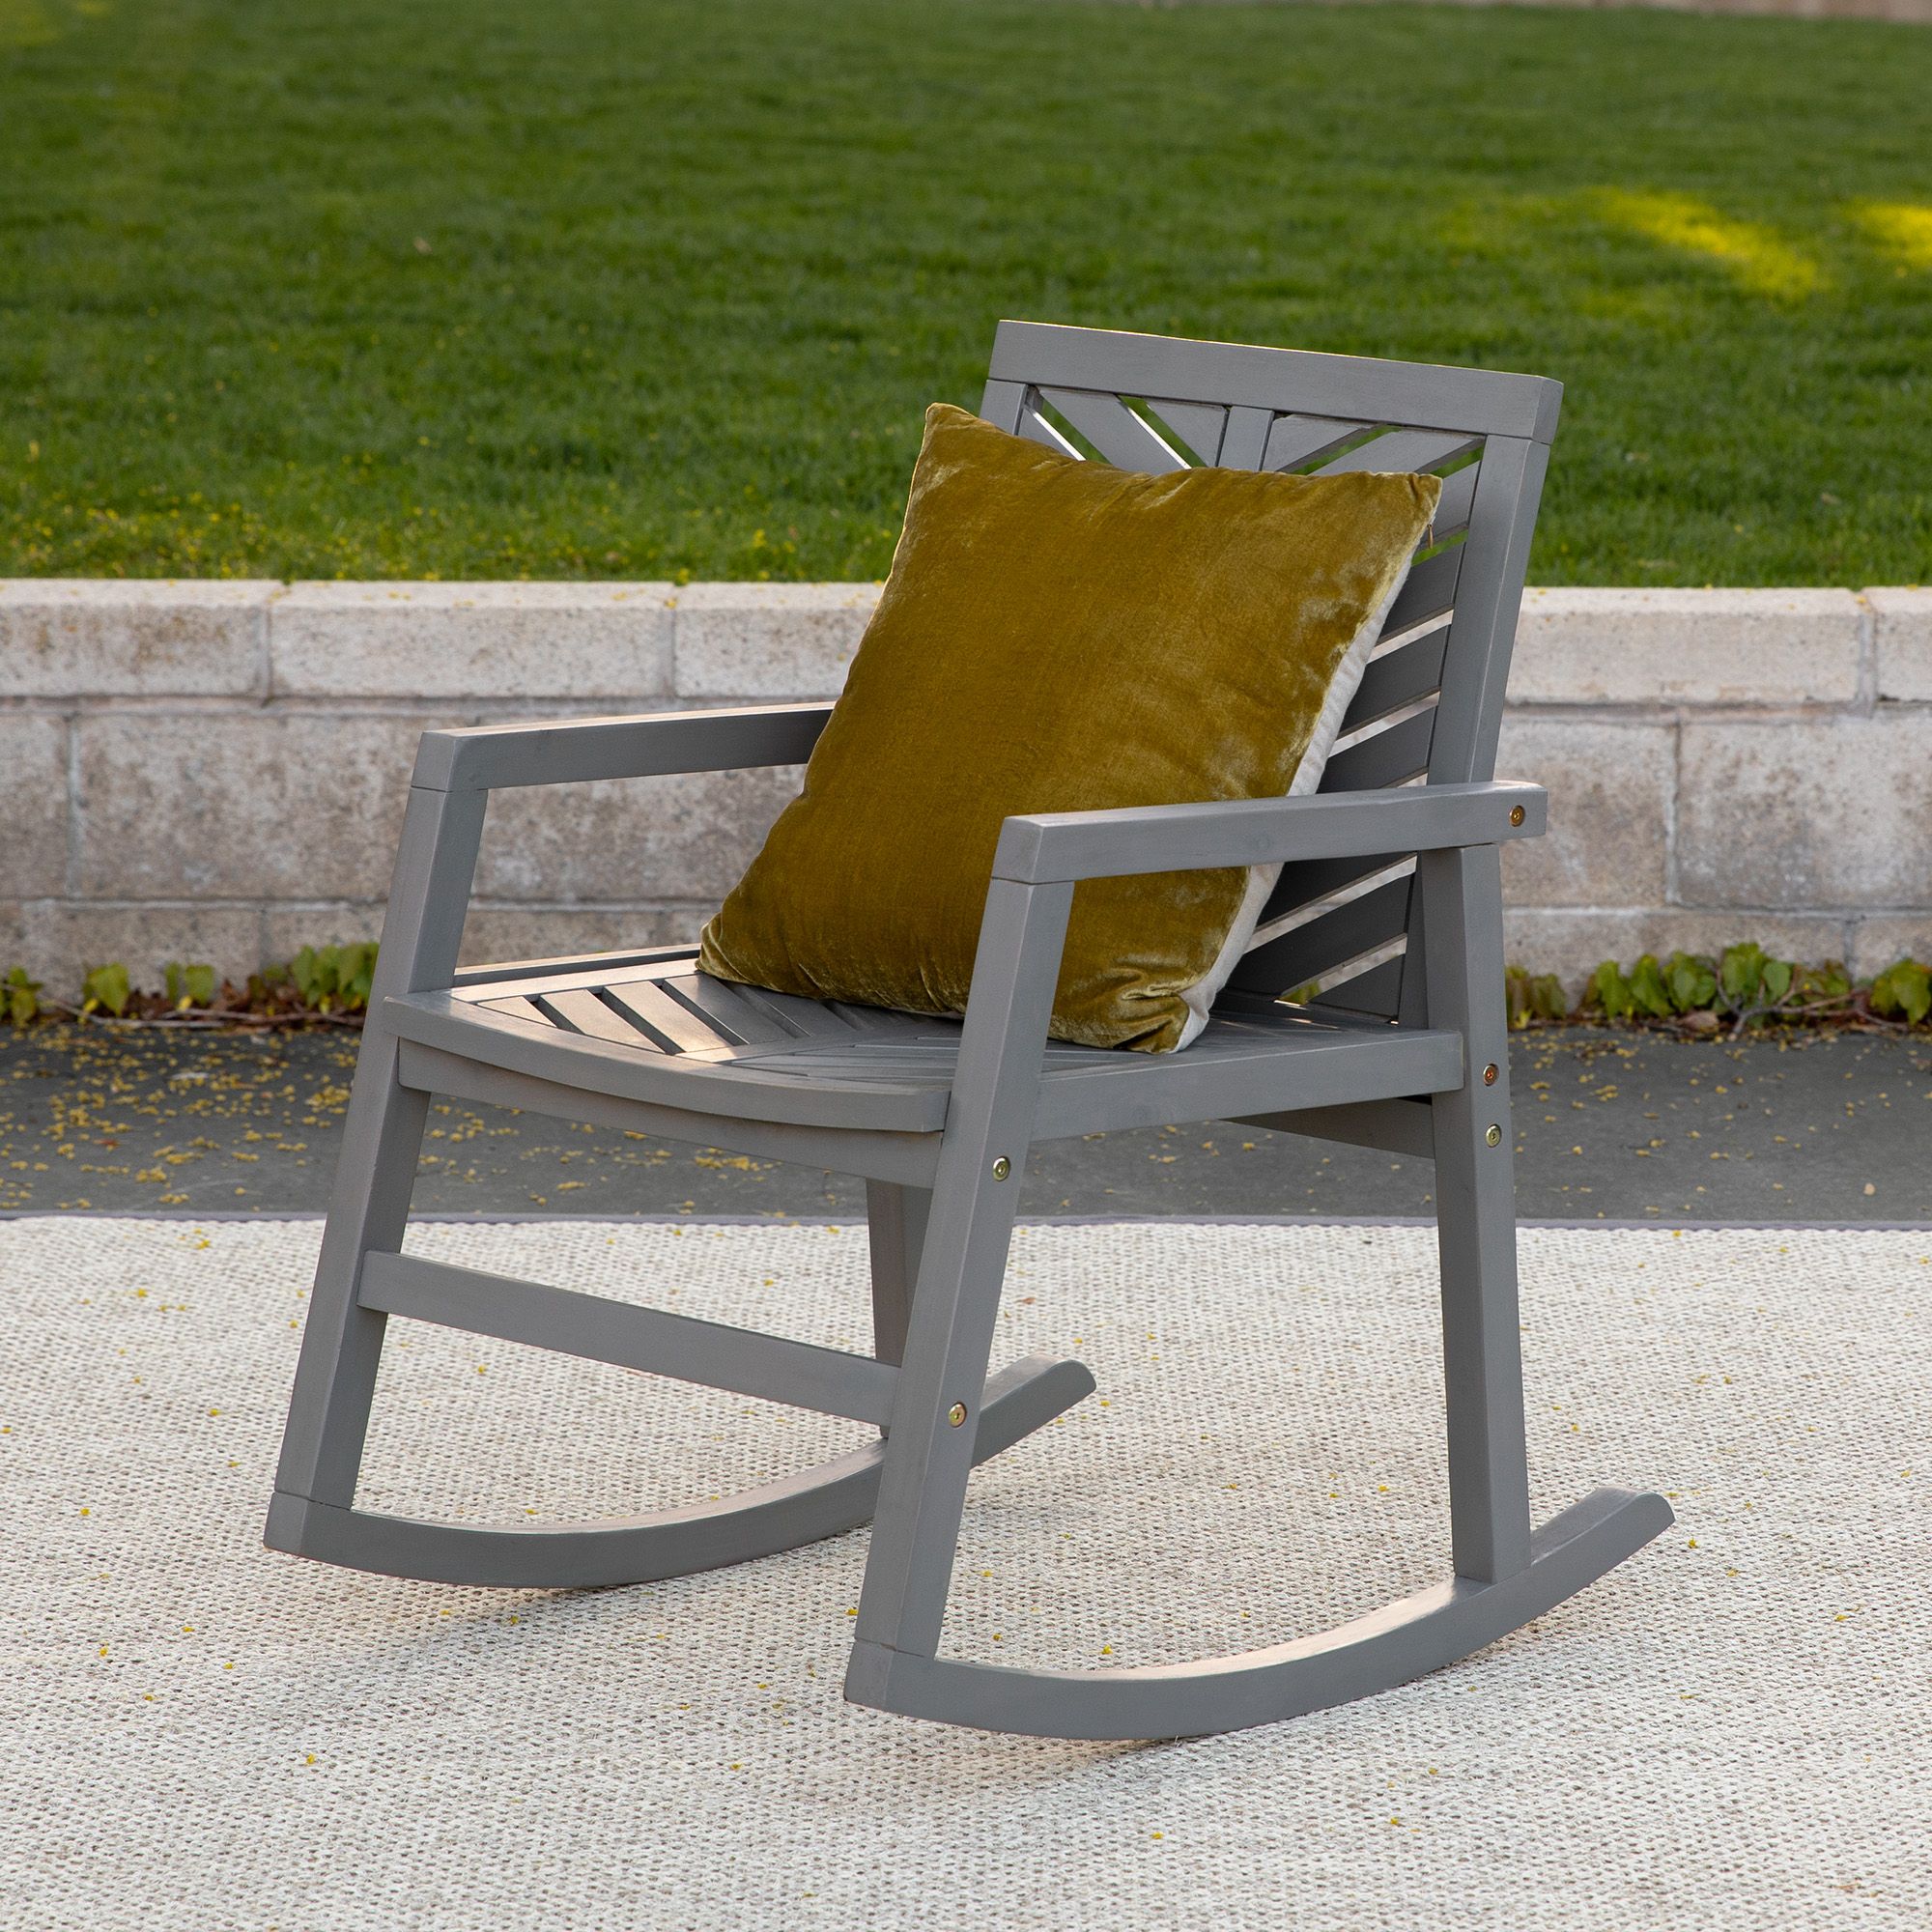 Widely Used Manor Park Outdoor Patio Rocking Chair With Chevron Design, Grey Wash Within Gray Wash Wood Porch Patio Chairs Sets (View 13 of 15)